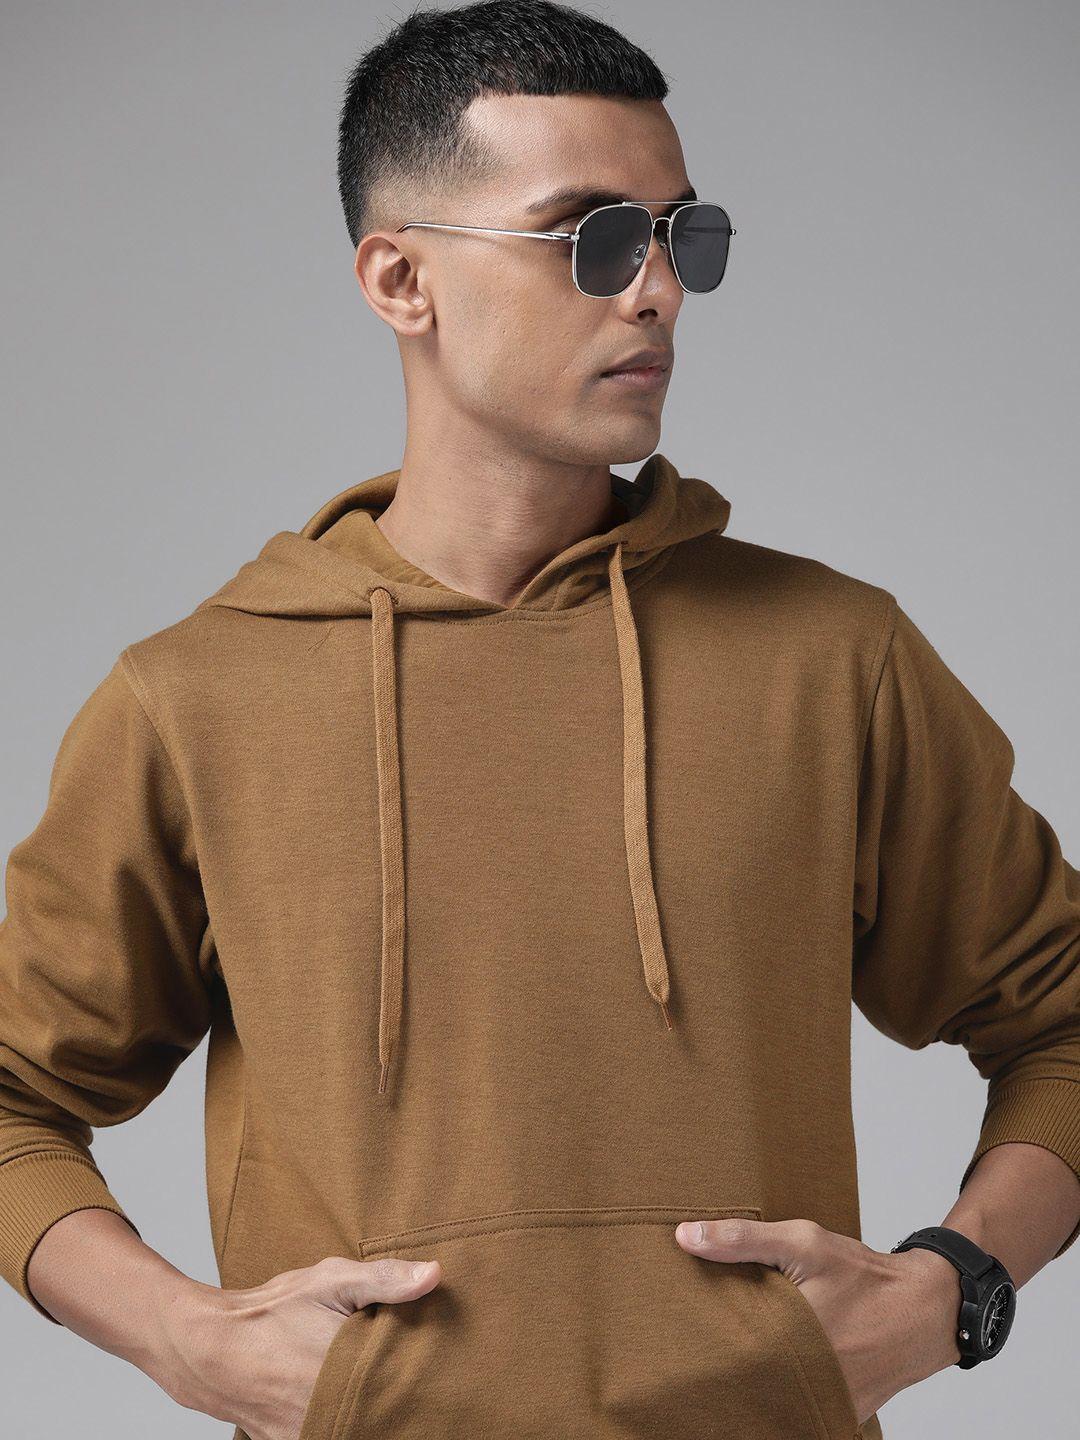 the roadster lifestyle co. men solid hooded sweatshirt